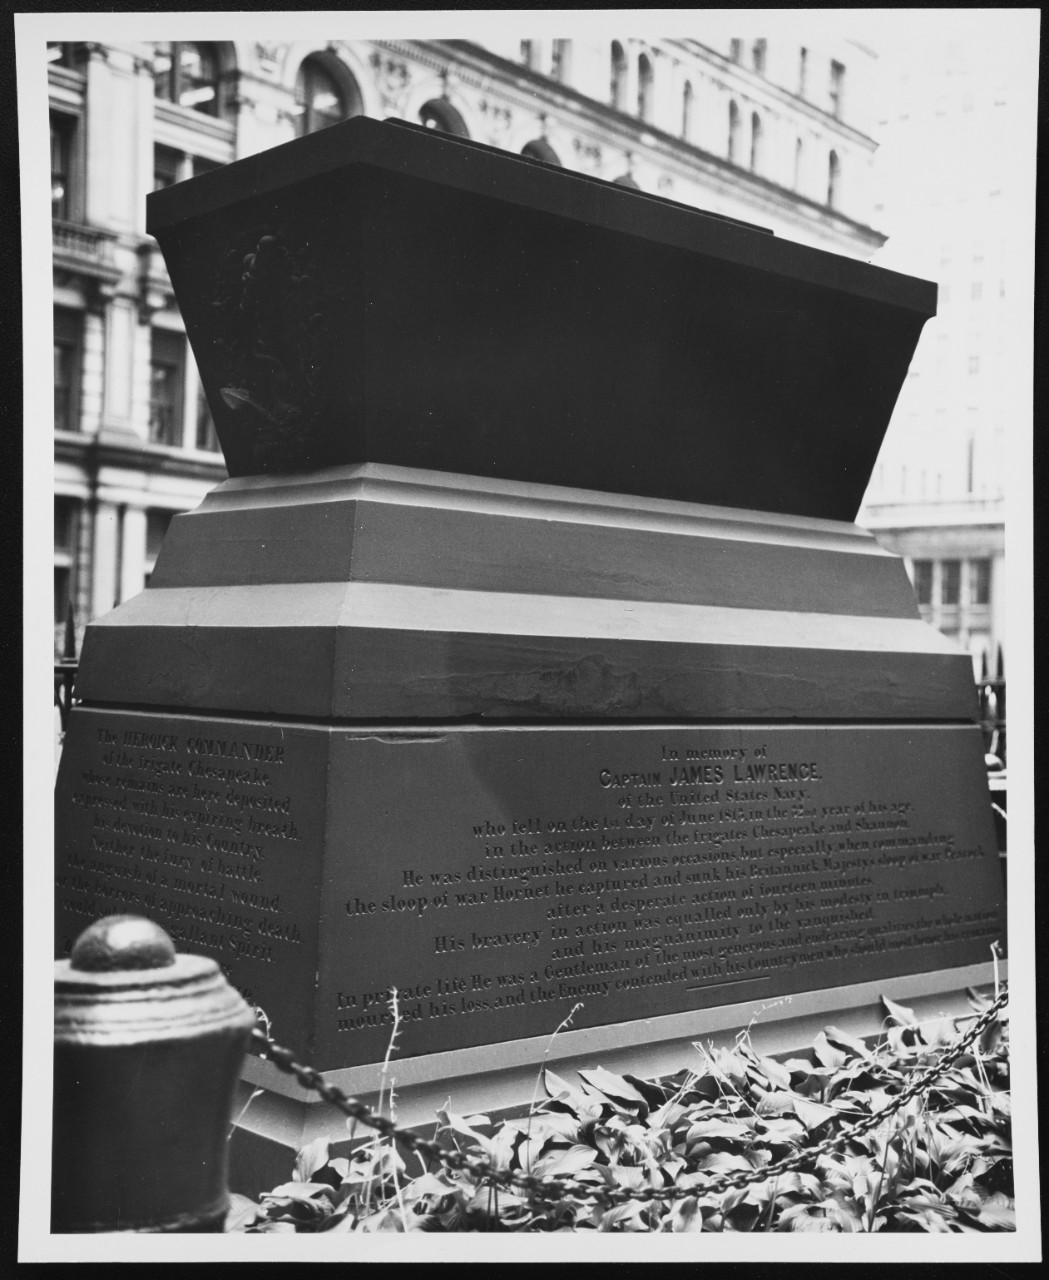 Grave stone of Captain James Lawrence, USN, who fell in the action between the frigates CHESAPEAKE and SHANNON